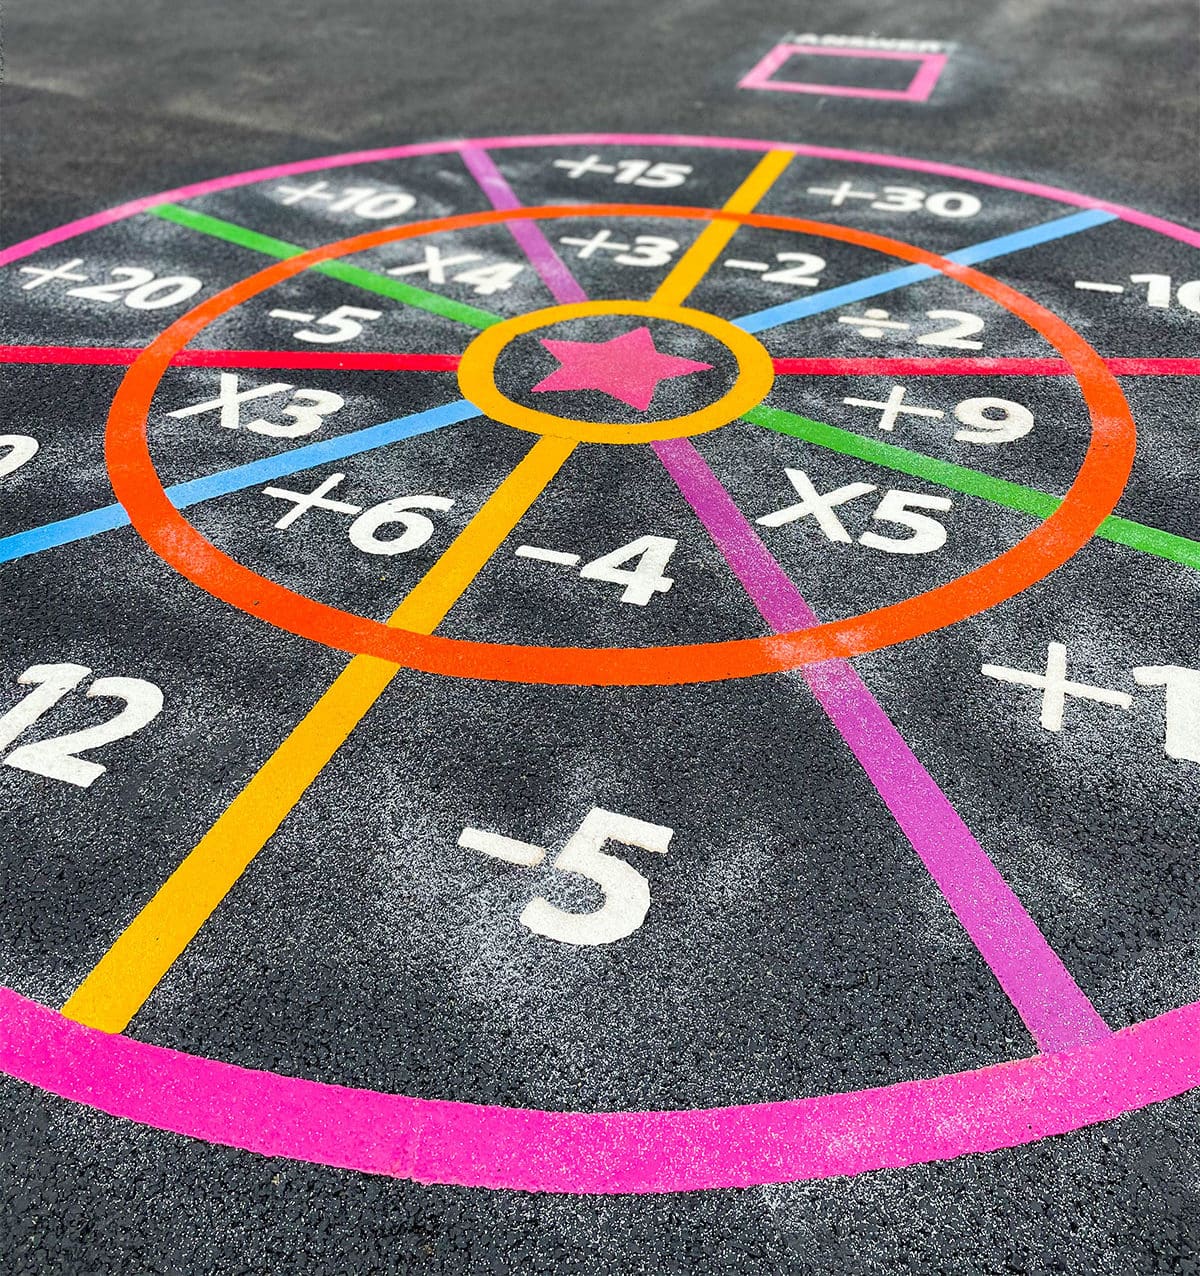 maths-is-all-fun-and-games-playground-markings